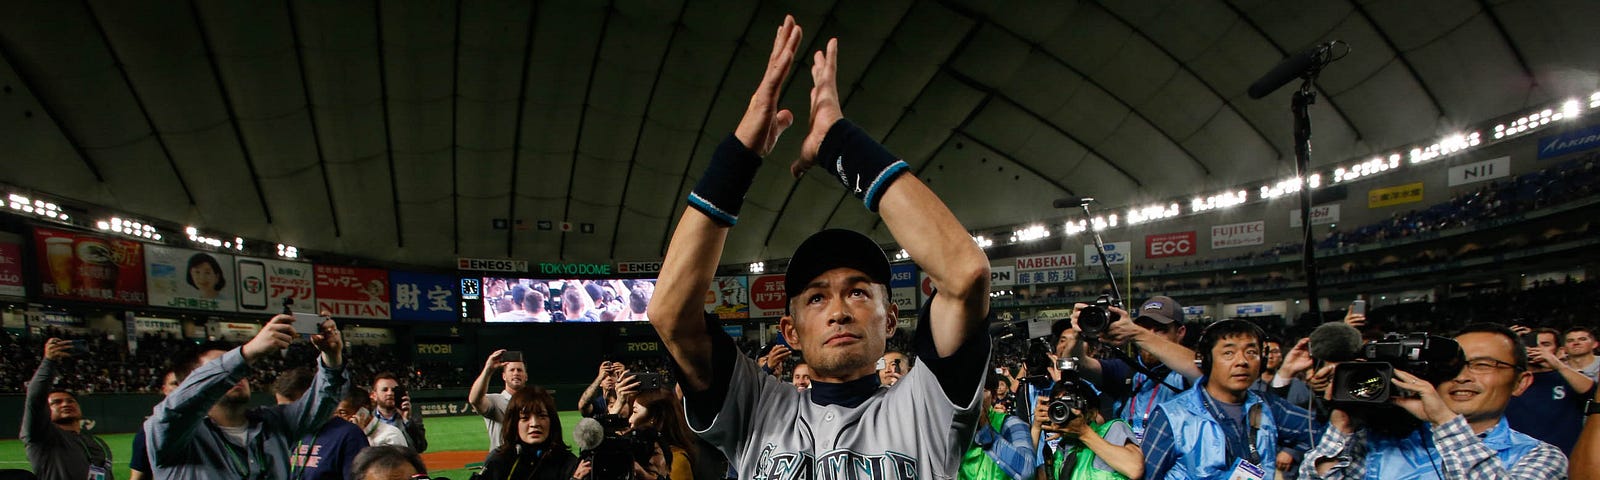 Posts about Ichiro on From the Corner of Edgar & Dave